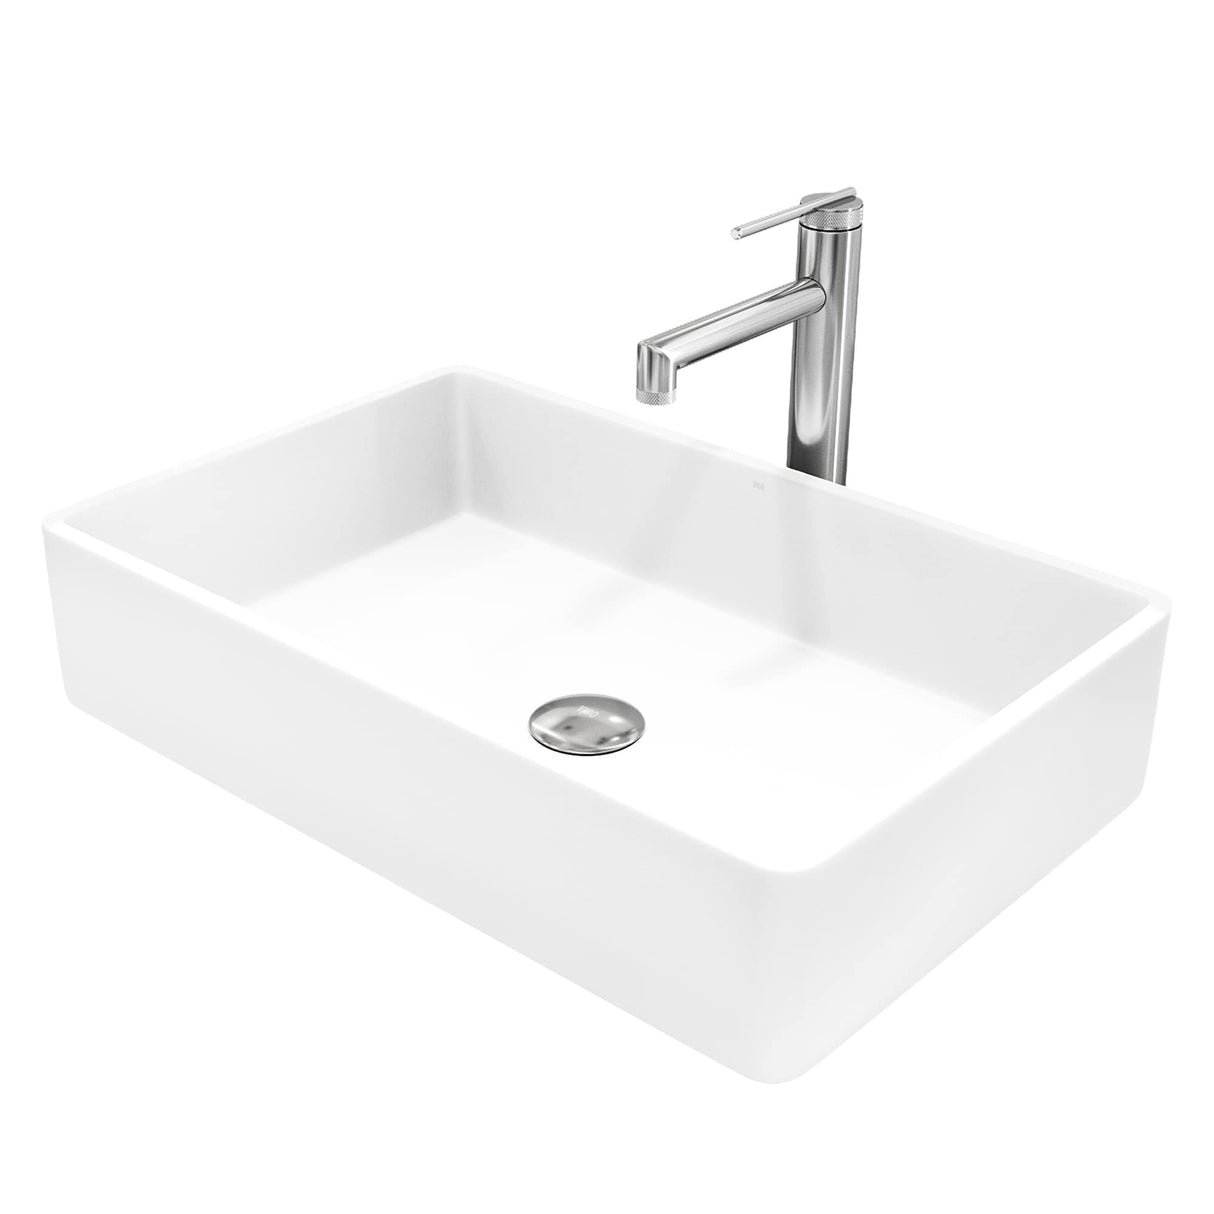 VIGO VGT2054 13.88" L -21.25" W -4.75" H Matte Stone Magnolia Composite Rectangular Vessel Bathroom Sink in White with Sterling Faucet and Pop-Up Drain in Chrome